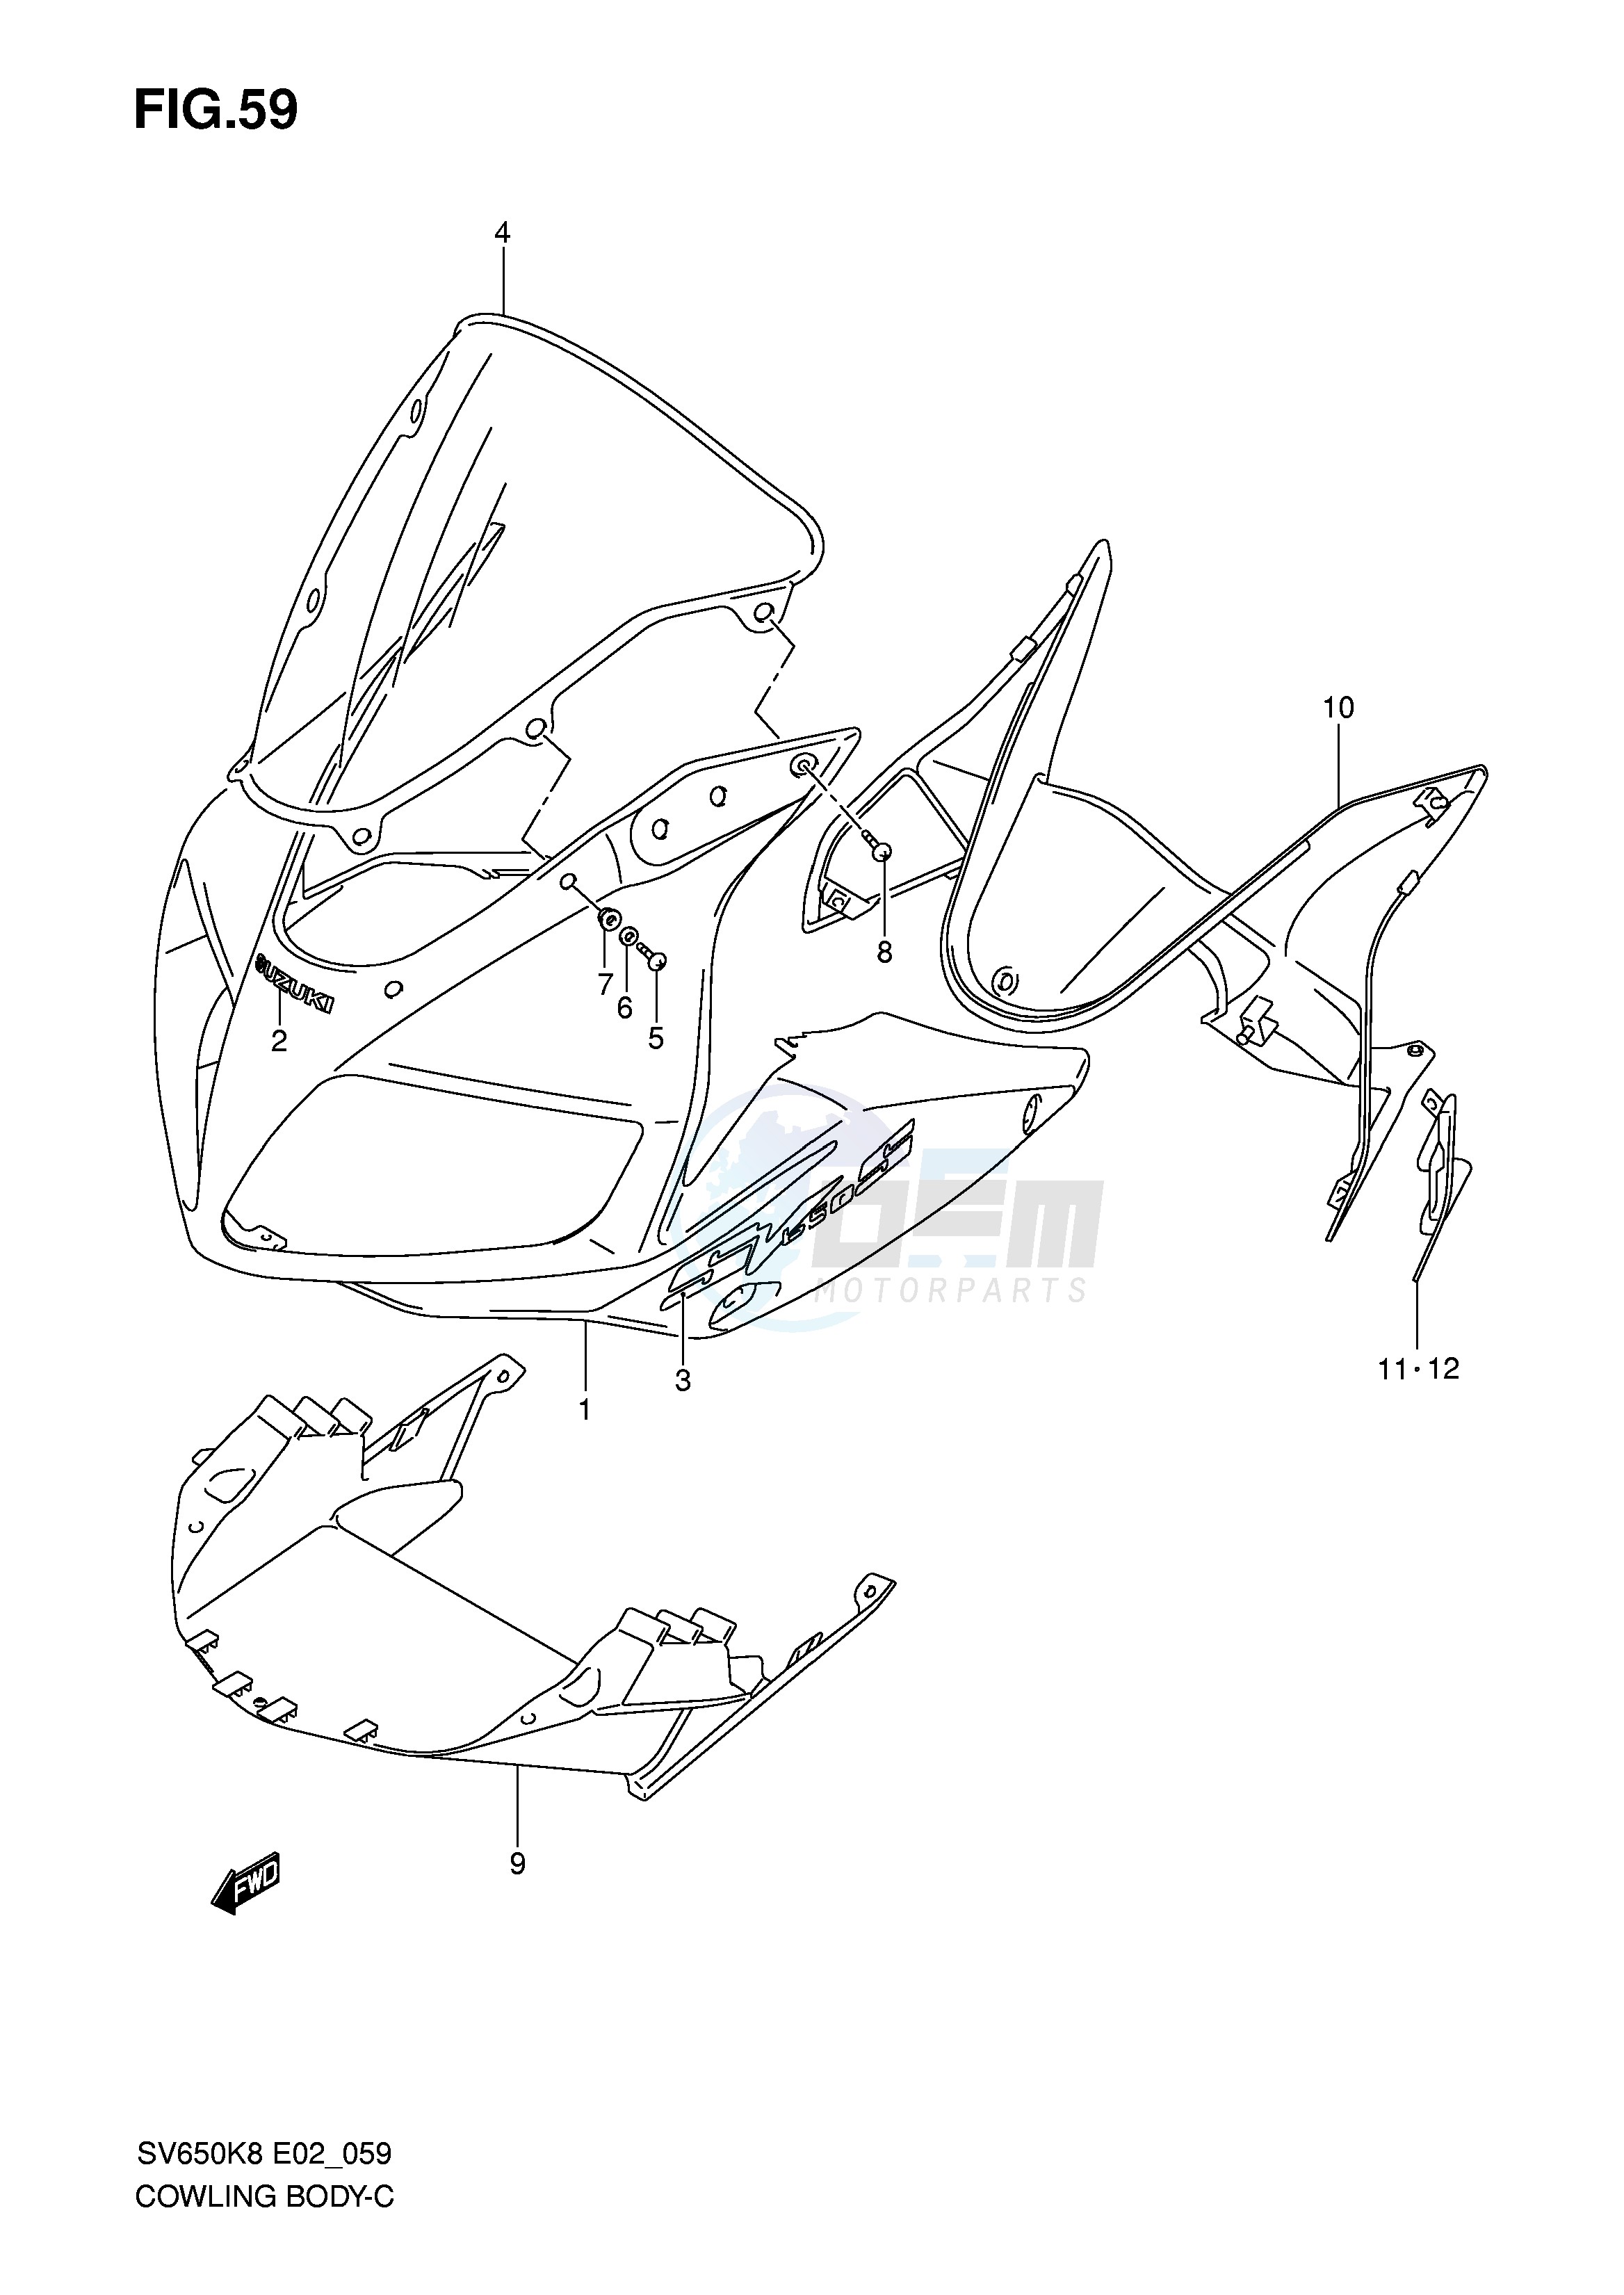 COWLING BODY (MODEL K8 WITH COWLING) blueprint